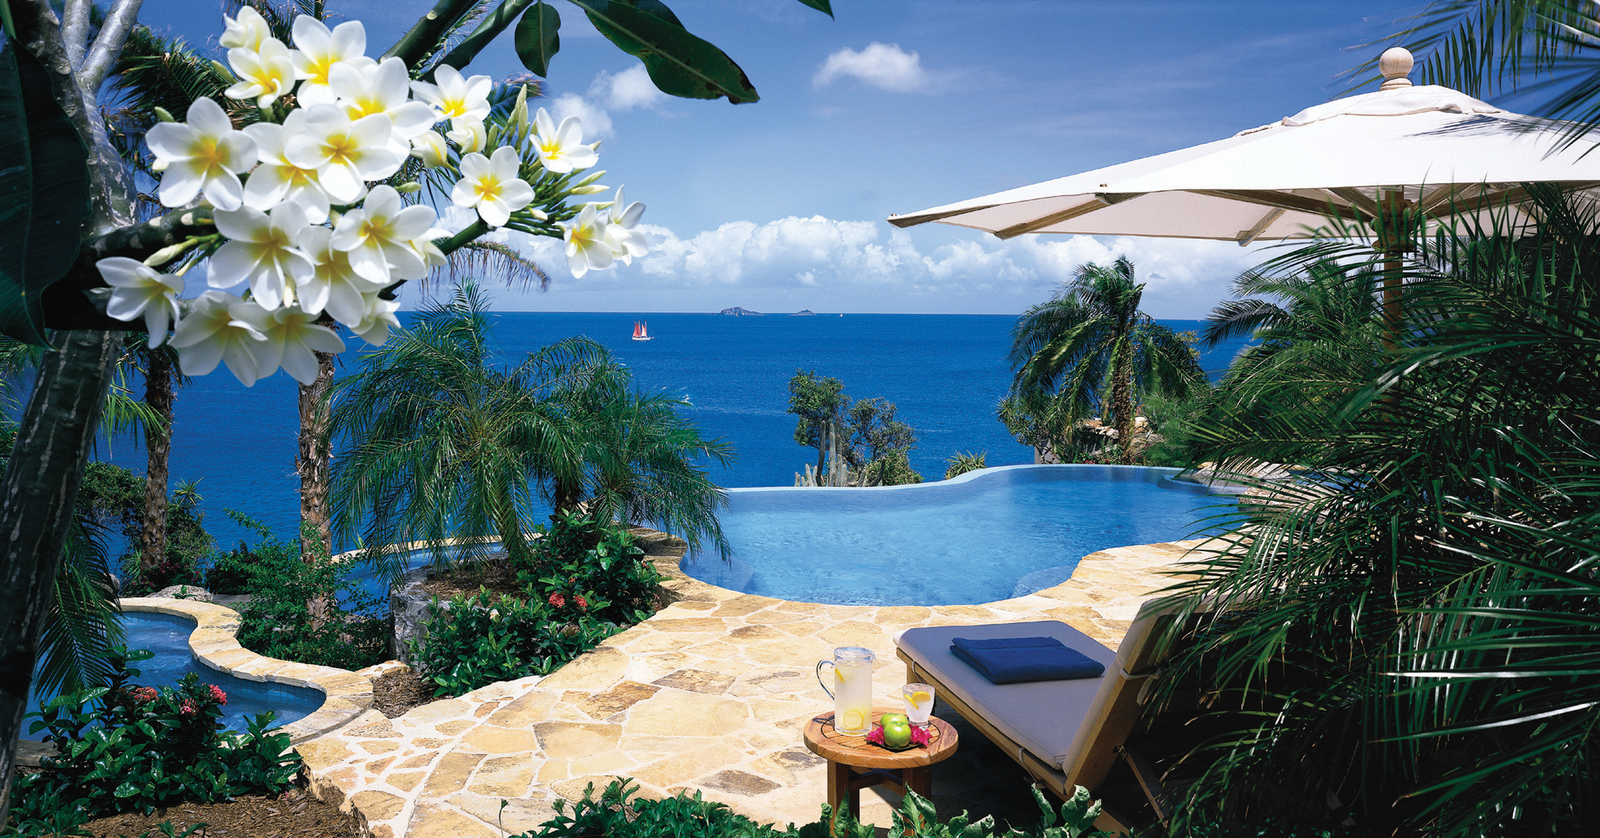 Honeymoon: Very Private Places, A Caribbean Paradise